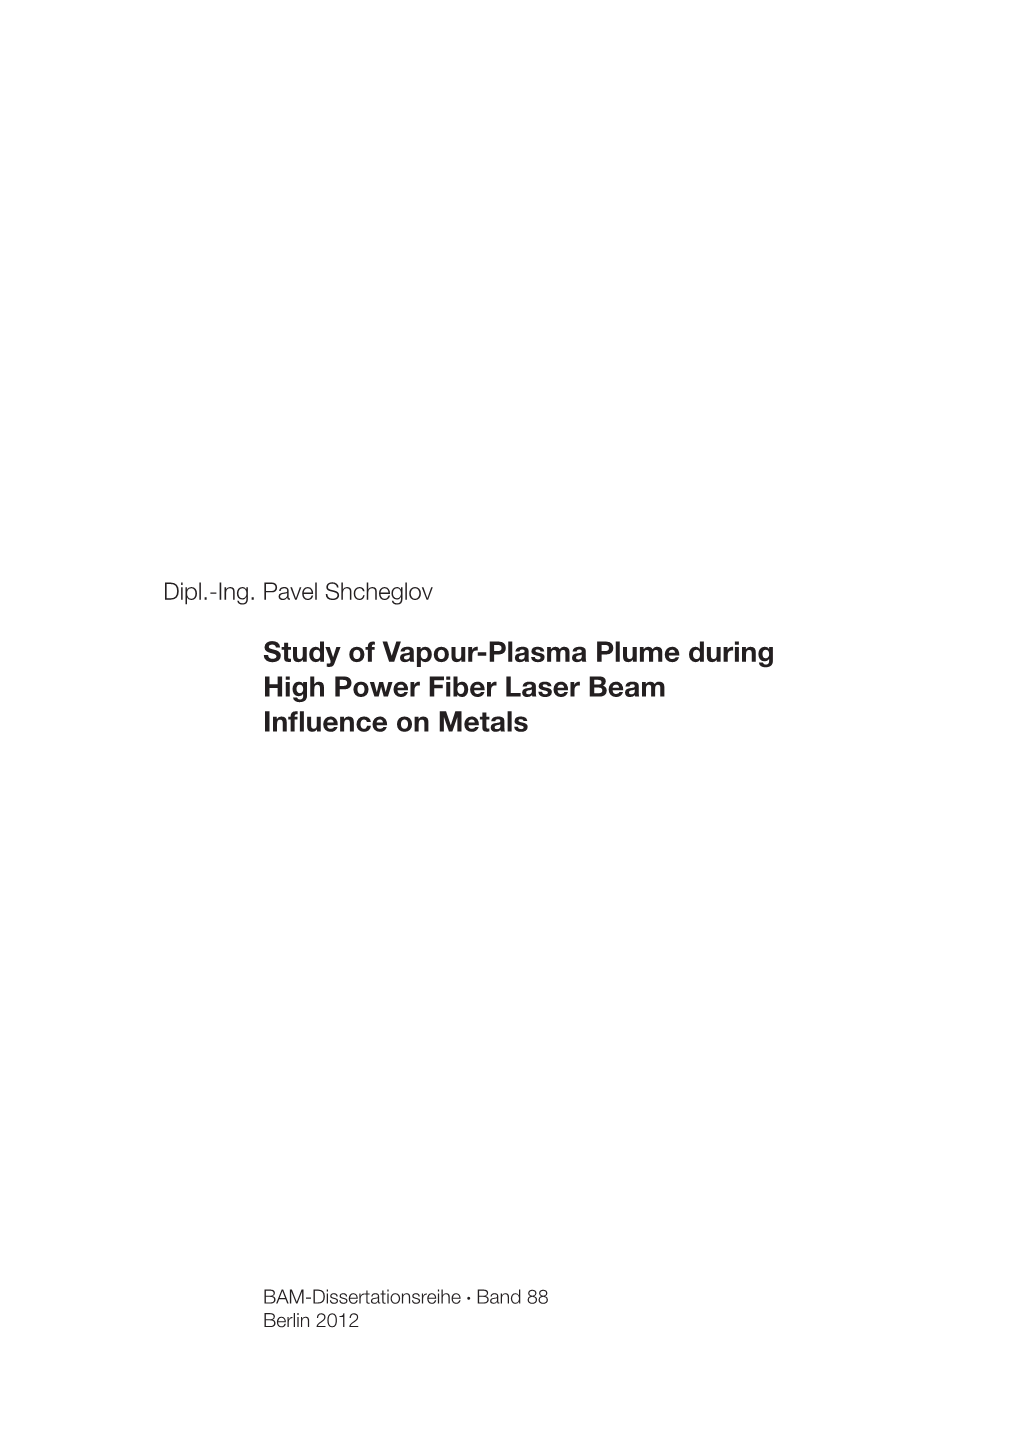 Study of Vapour-Plasma Plume During High Power Fiber Laser Beam Inﬂ Uence on Metals